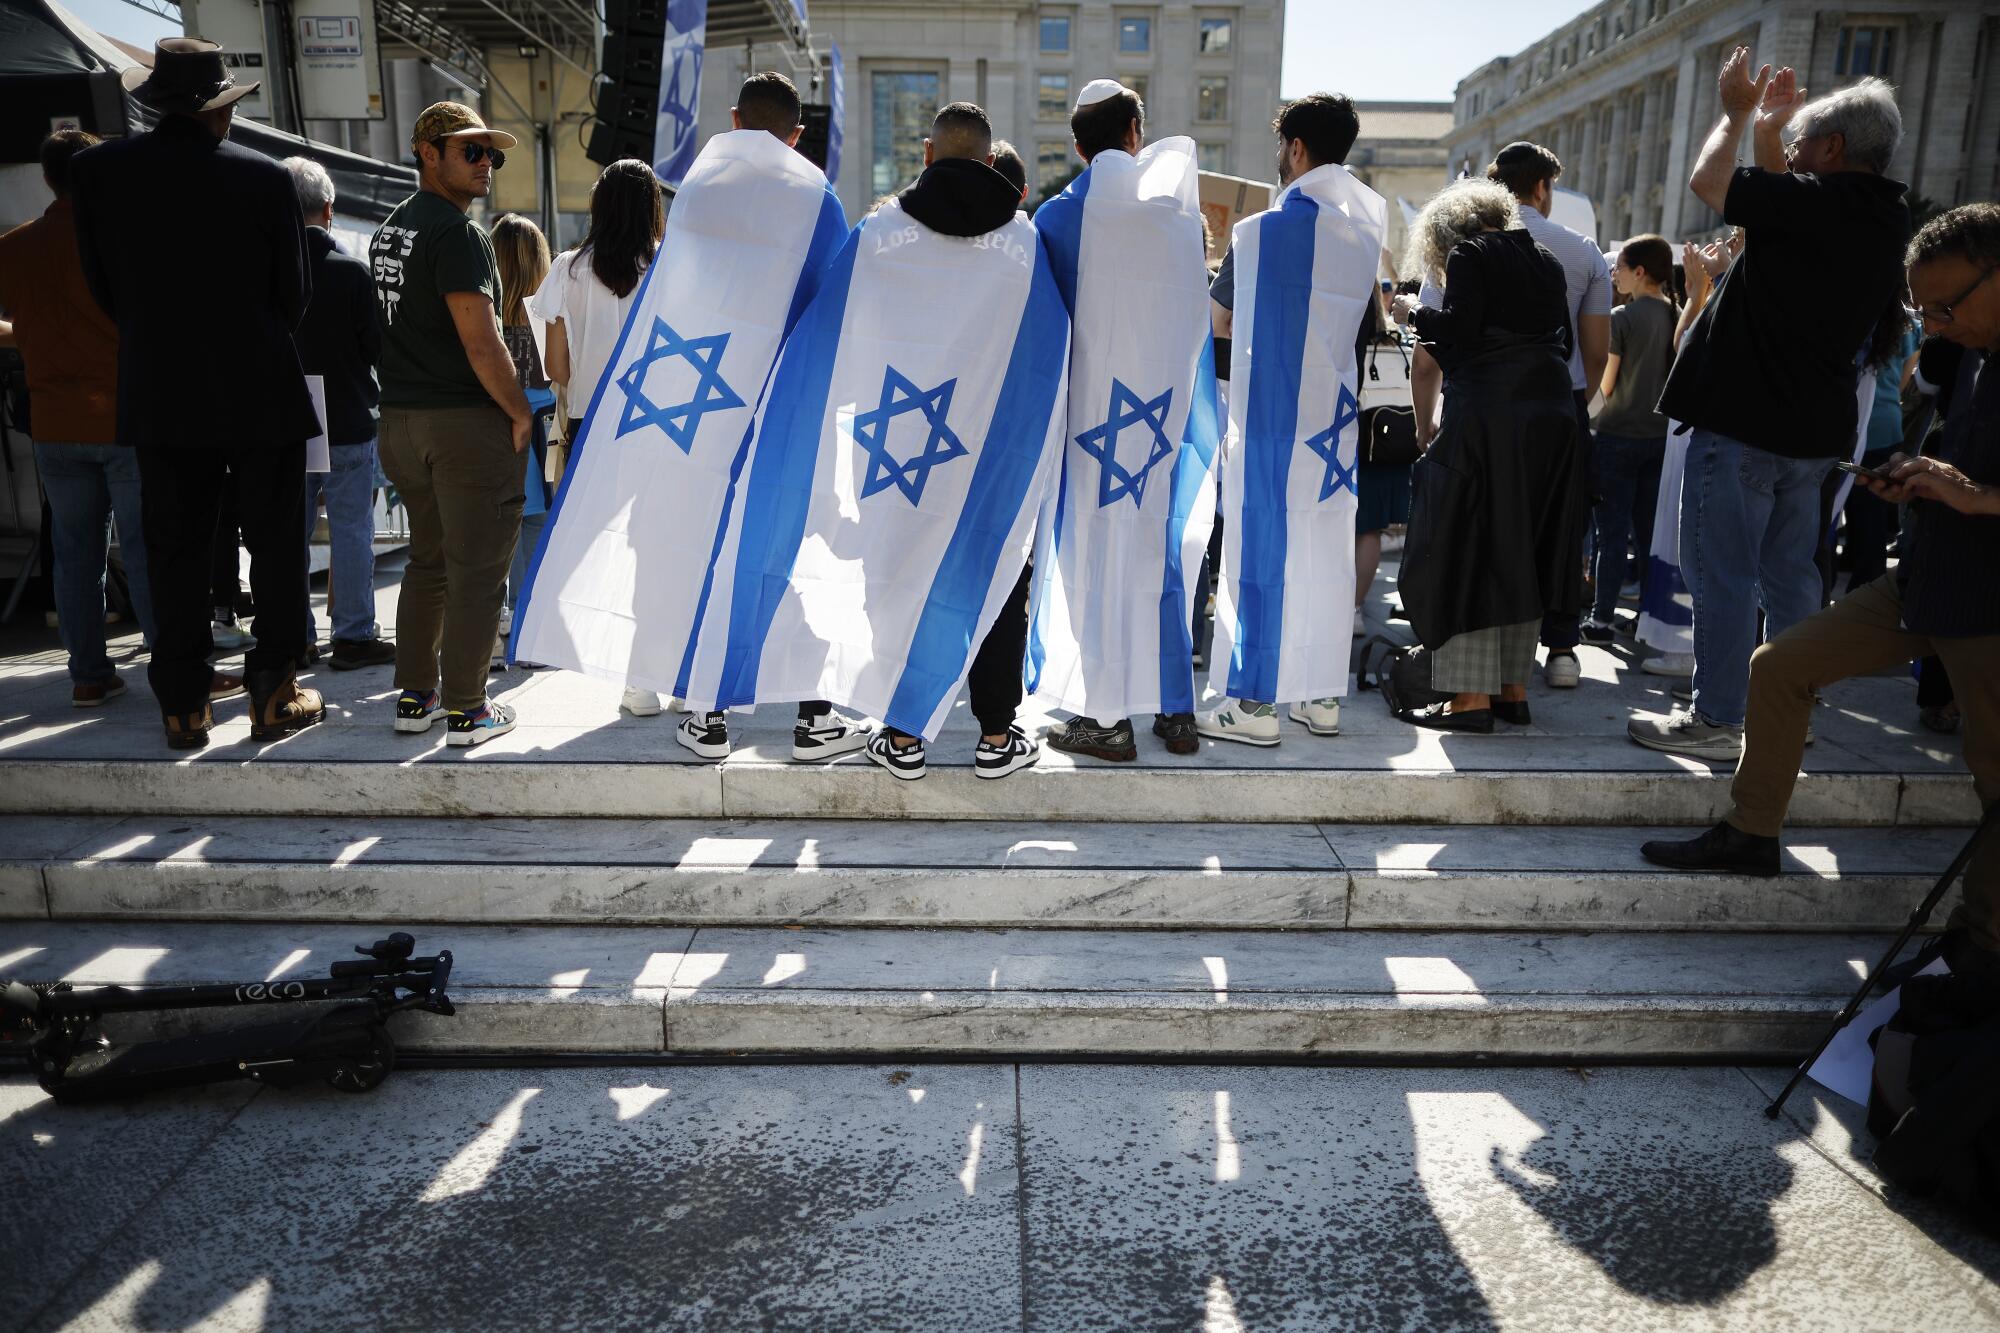  People draped with Israeli flags join a demonstration.